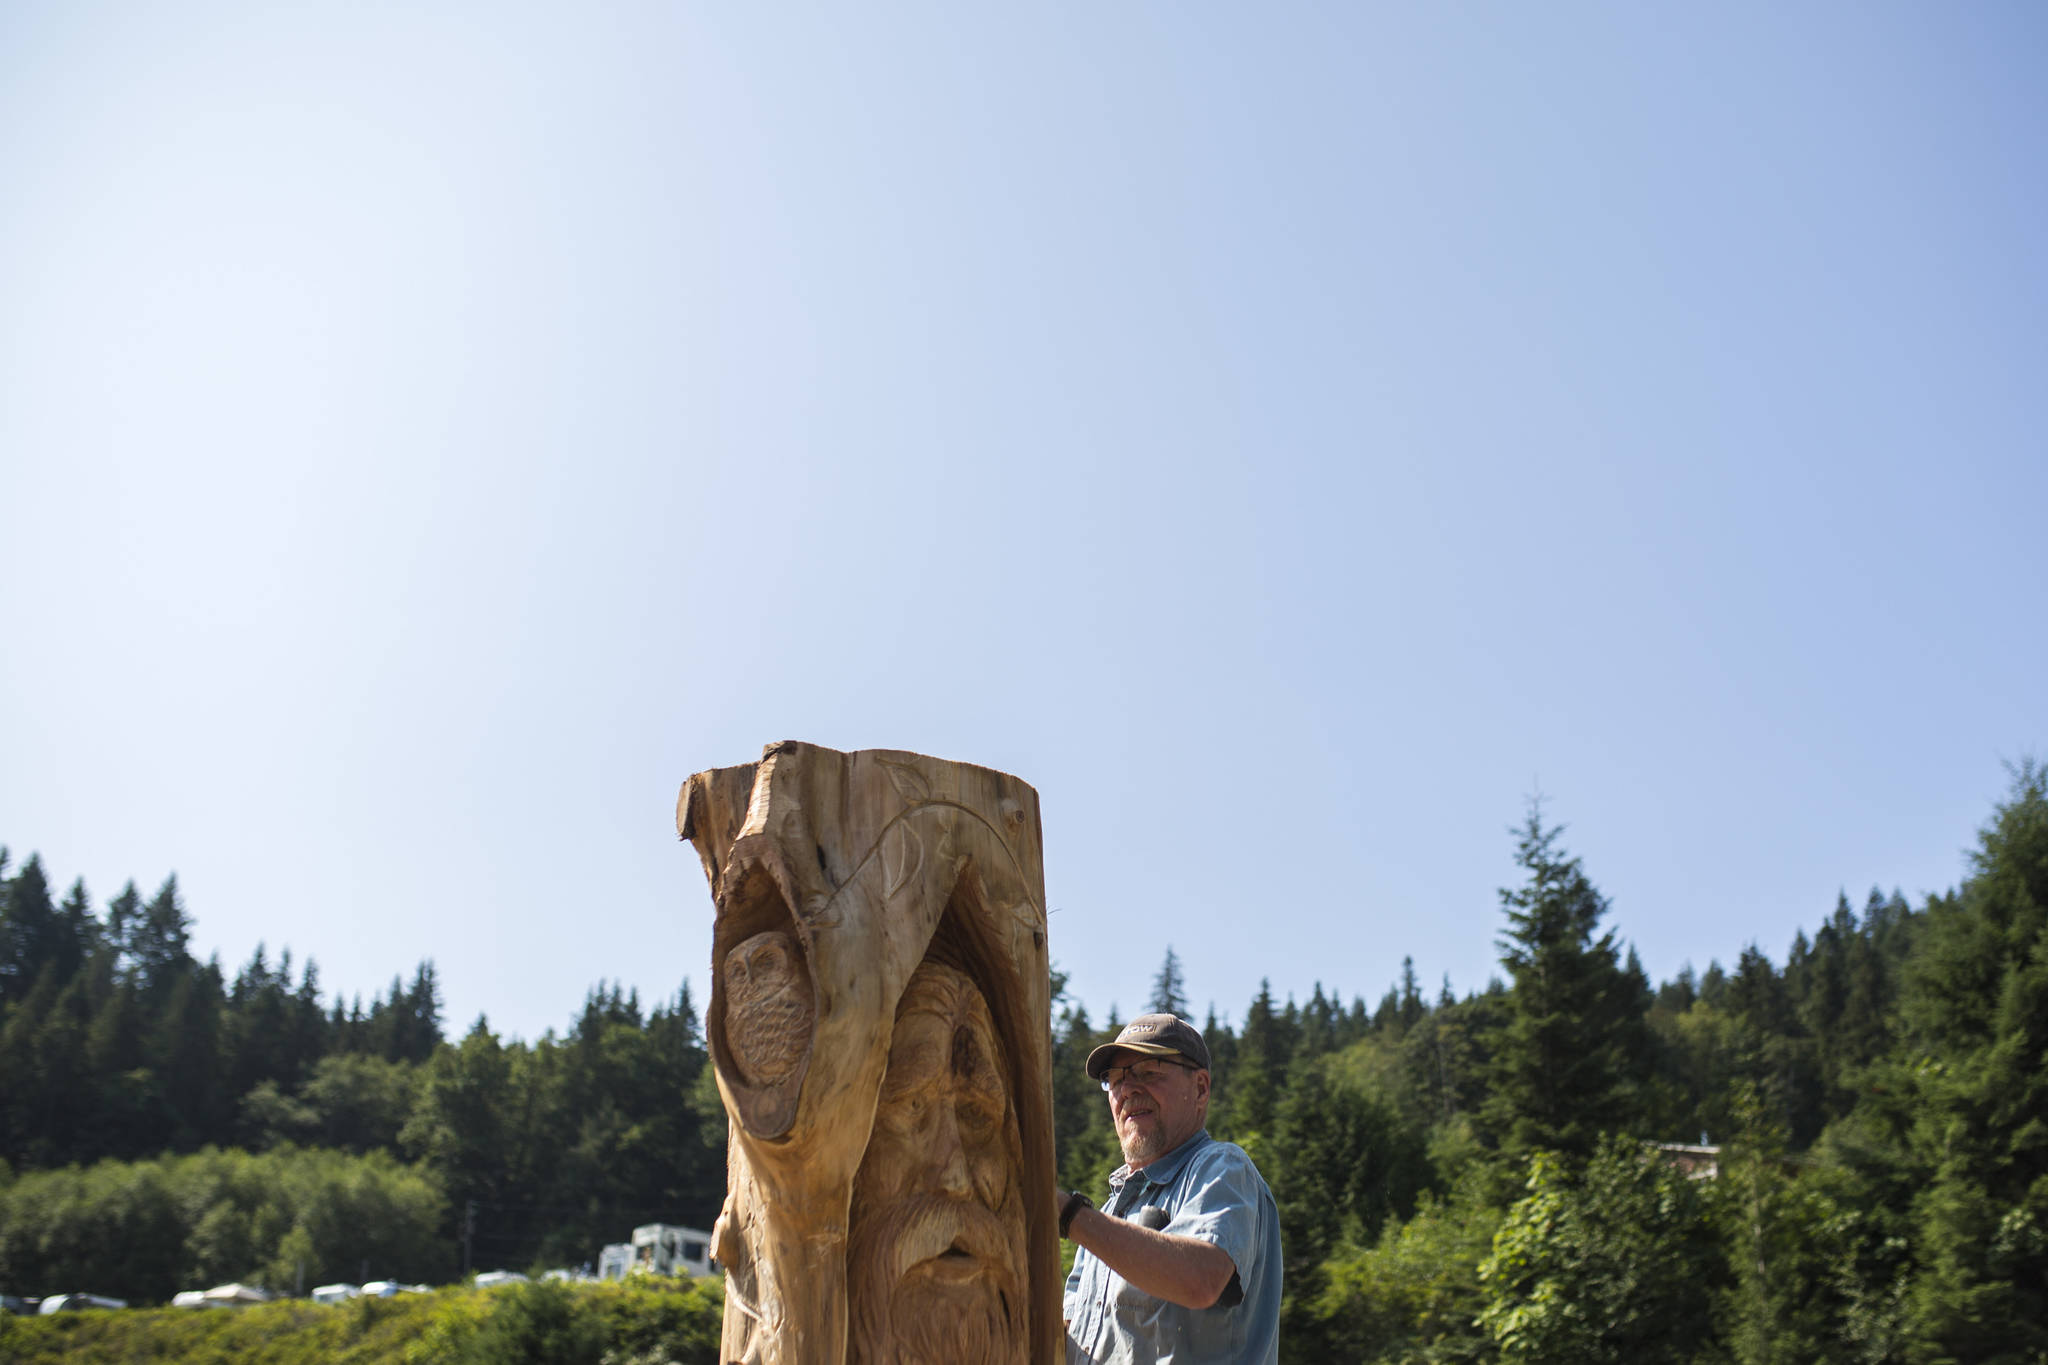 18011461_web1_190804-CRM-woodcarving02